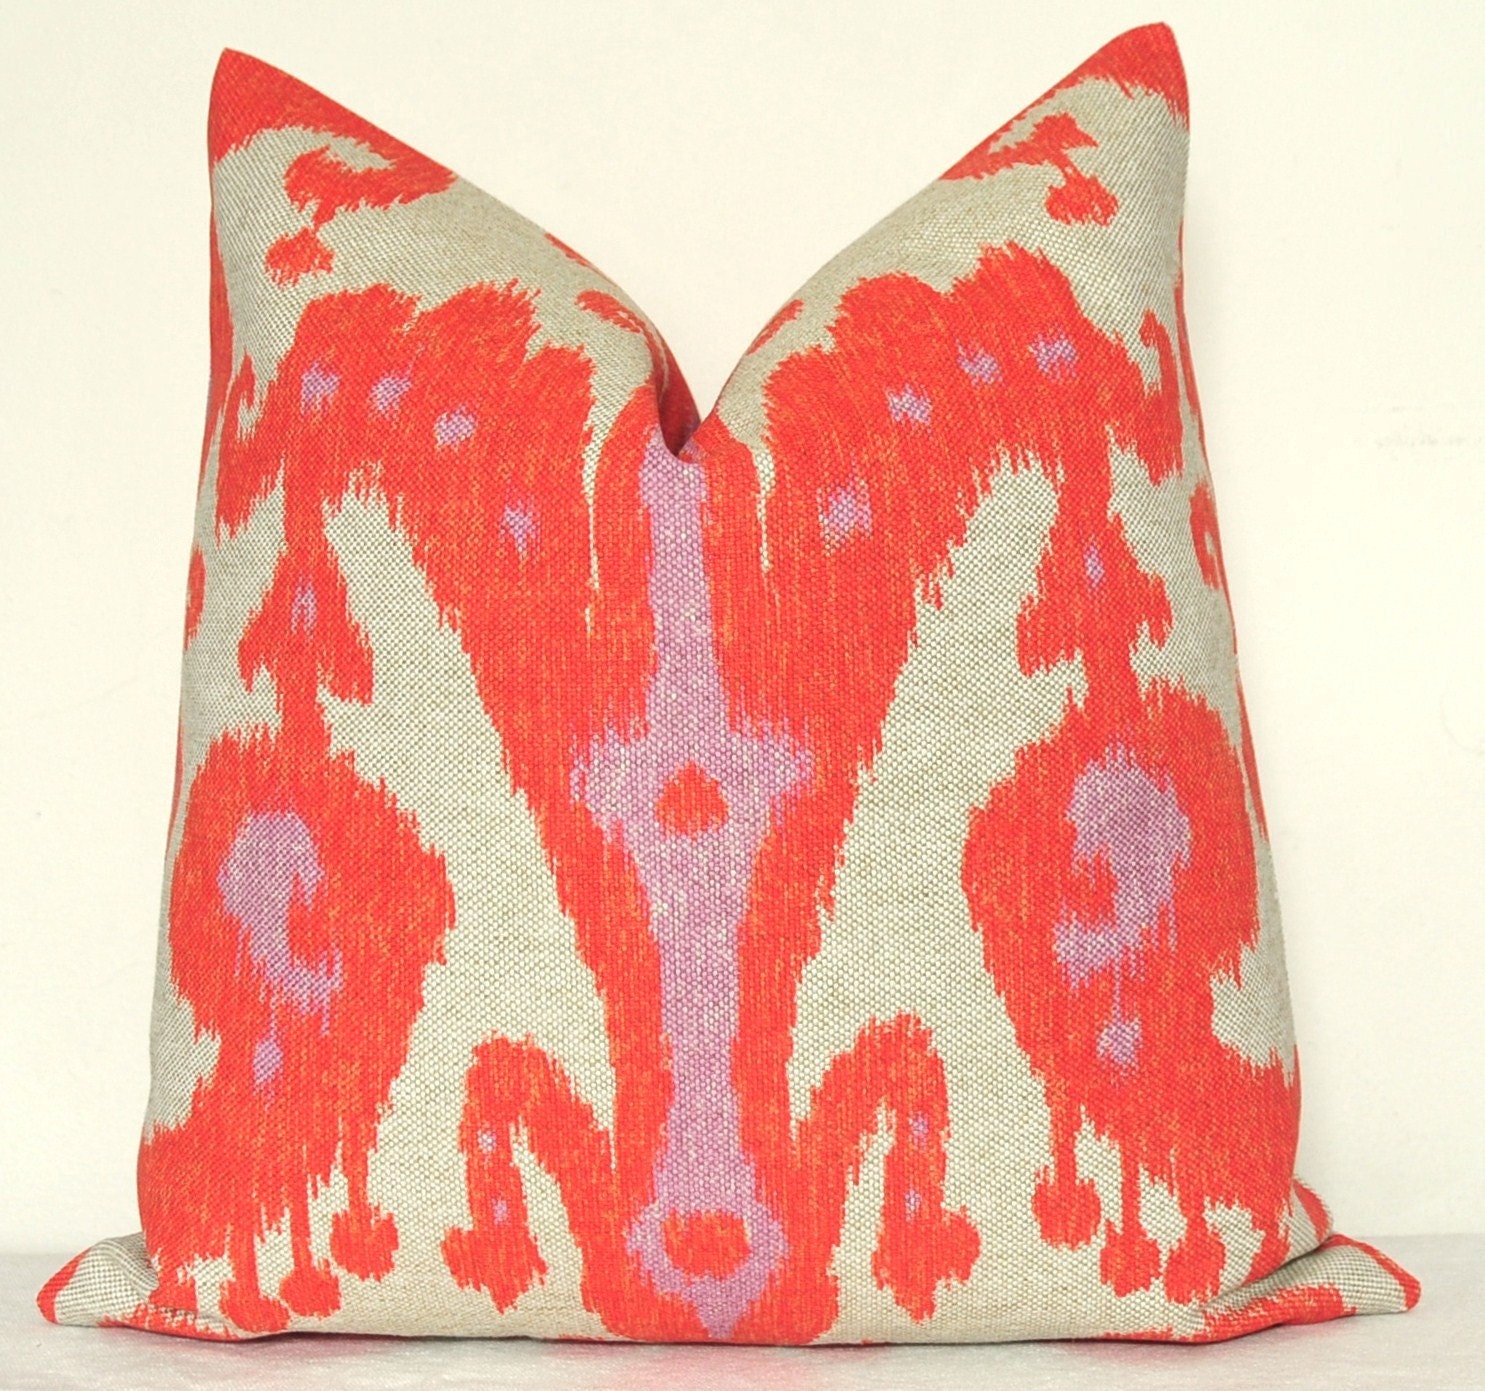 BOTH SIDES - Pillow Cover - Throw Pillow - Toss Pillow - Accent Pillow - Decorative Pillow - Ikat - Hot Coral - Lilac - 17x17 in